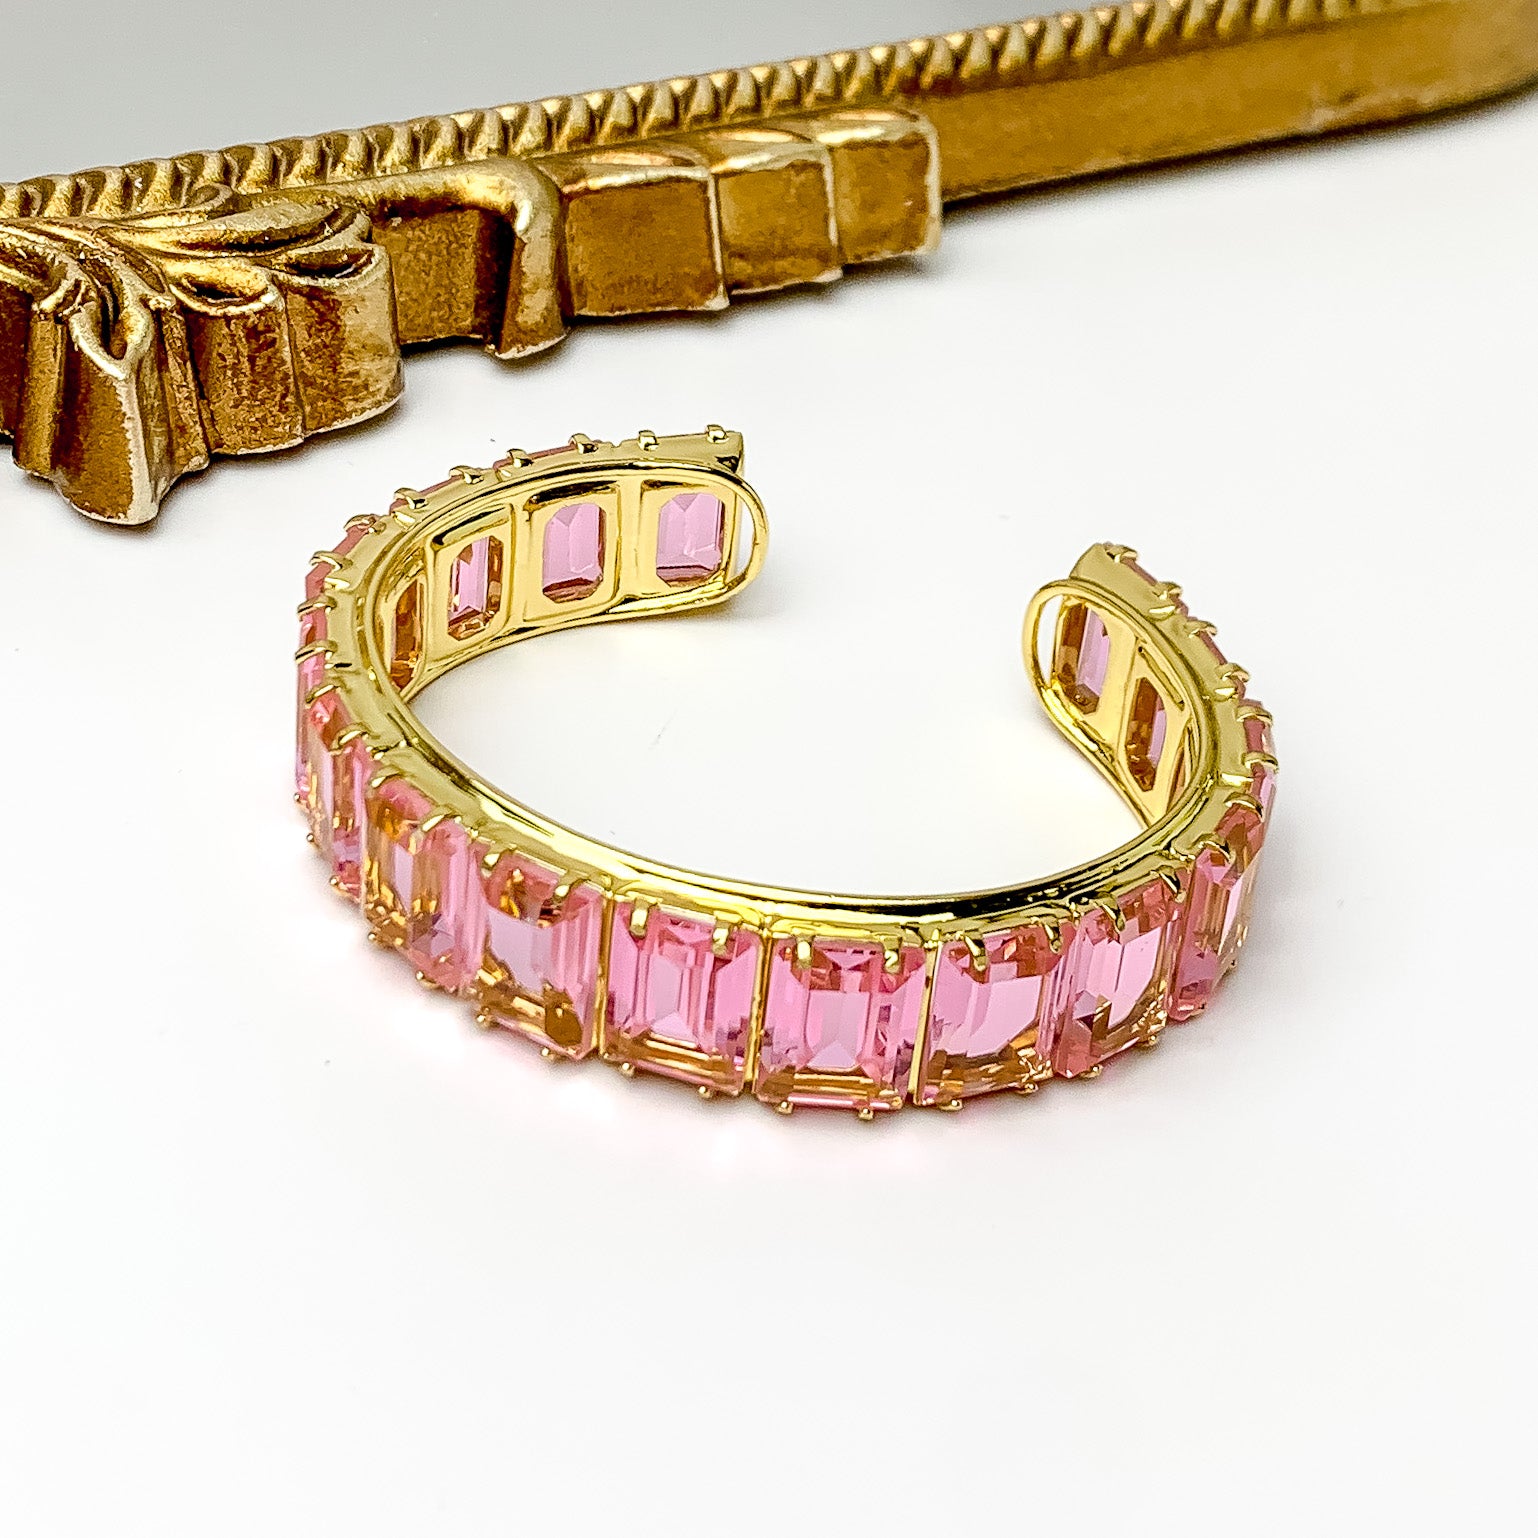 Gold bangle with a pink, rectangle crystal inlay. This bracelet is pictured on a white background with a gold mirror at the top of the picture.  